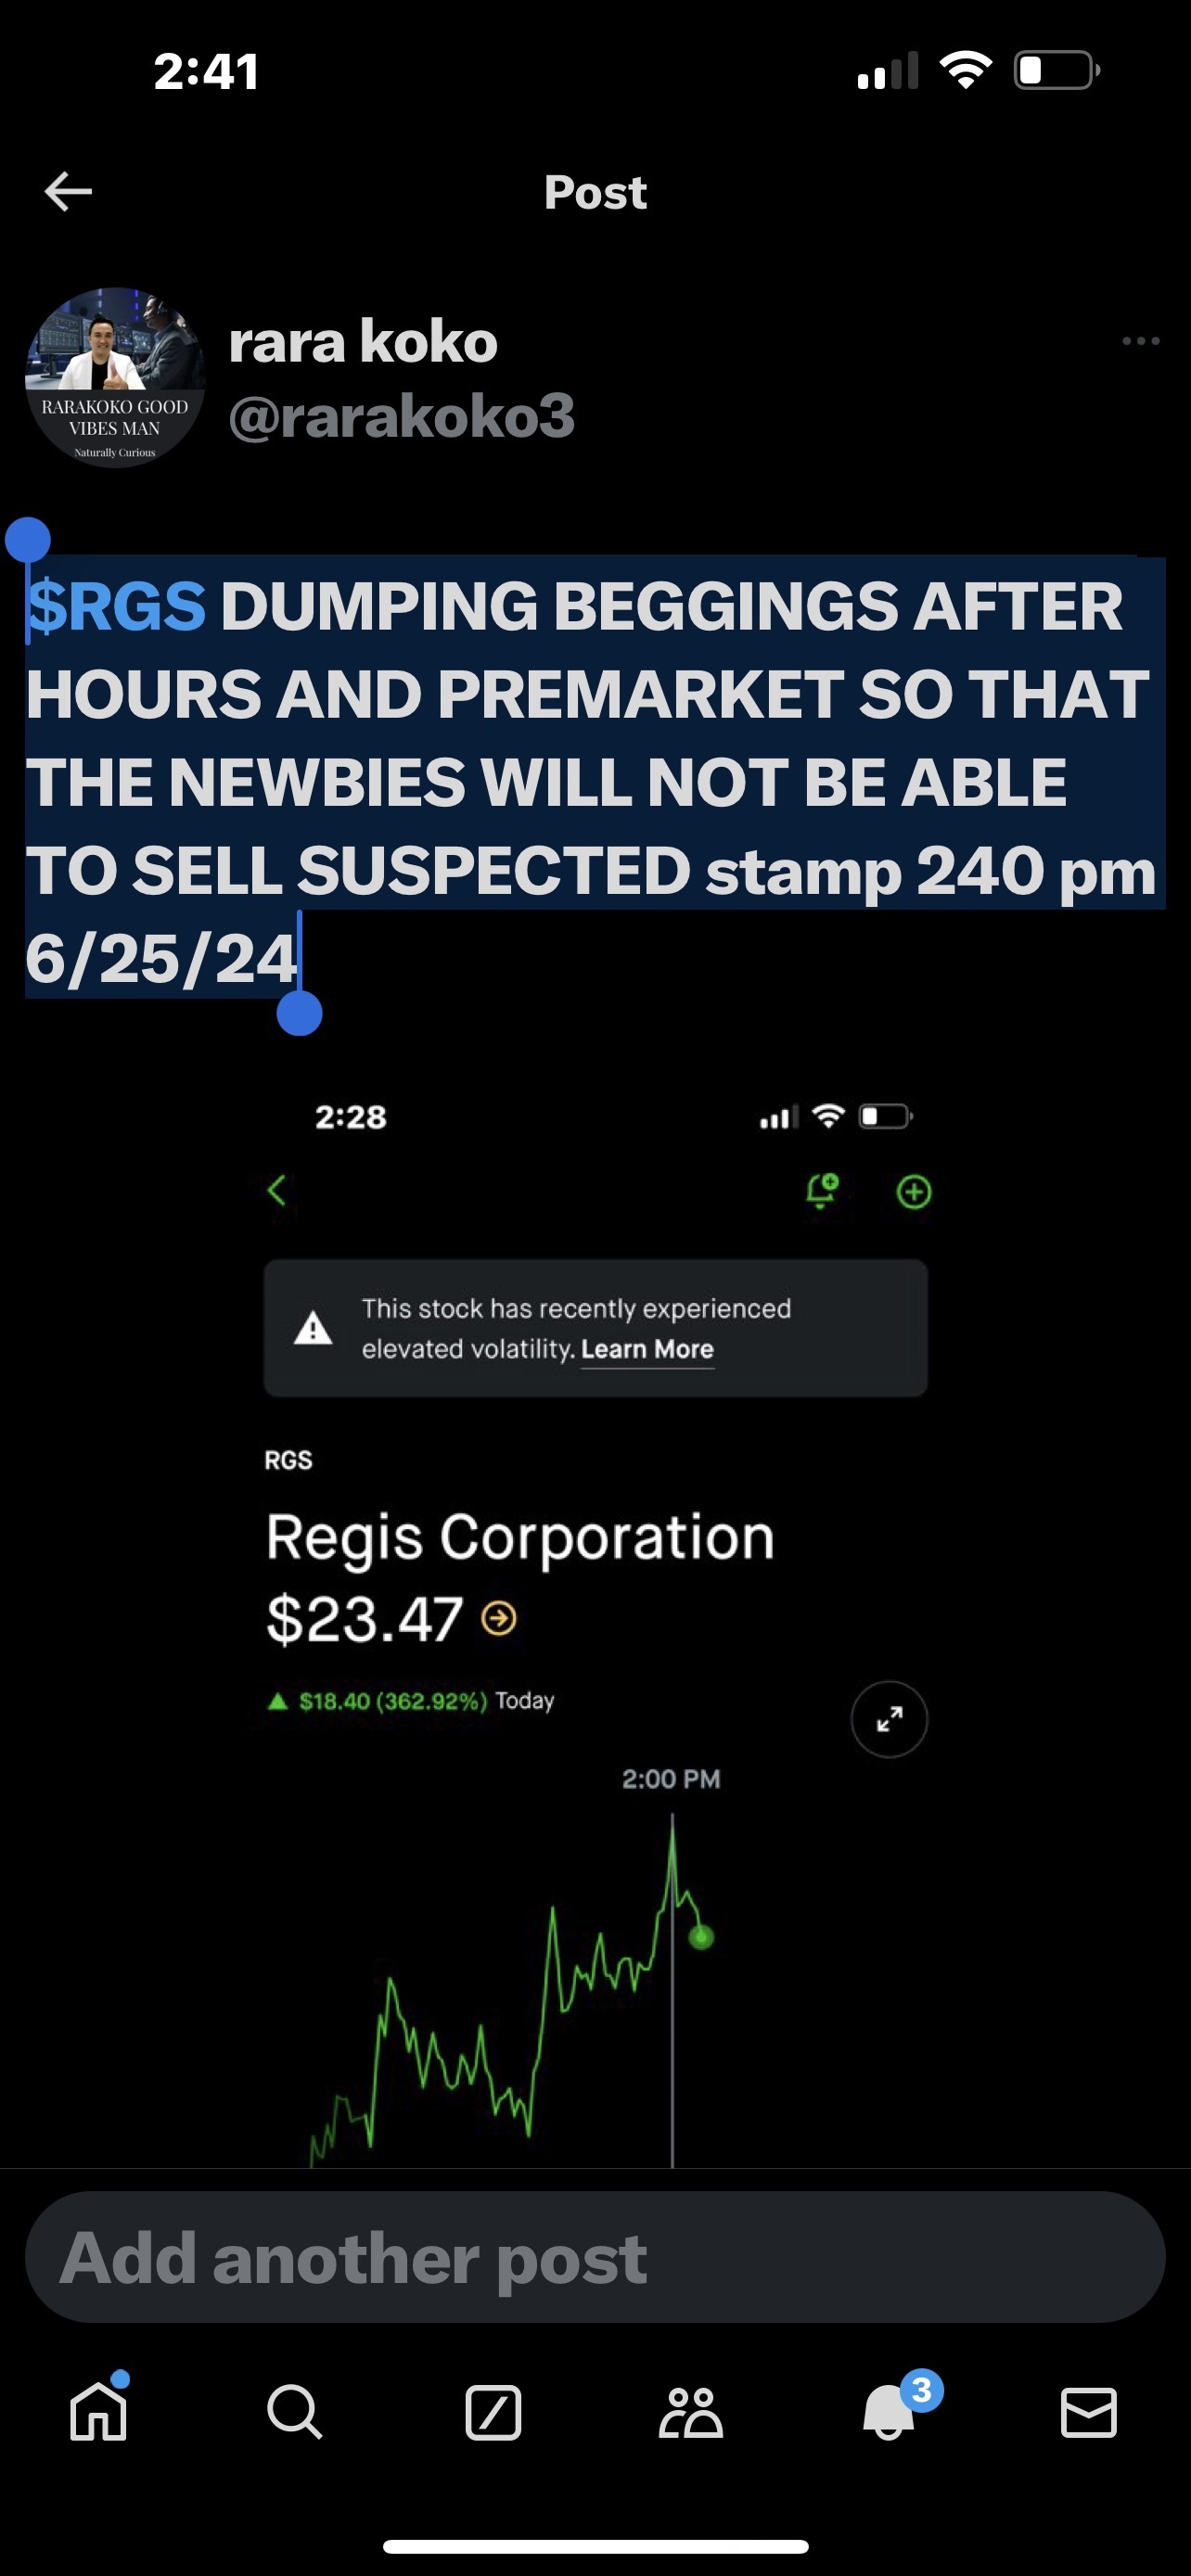 $RGS DUMPING BEGGINGS AFTER HOURS AND PREMARKET SO THAT THE NEWBIES WILL NOT BE ABLE TO SELL SUSPECTED stamp 240 pm 6/25/24